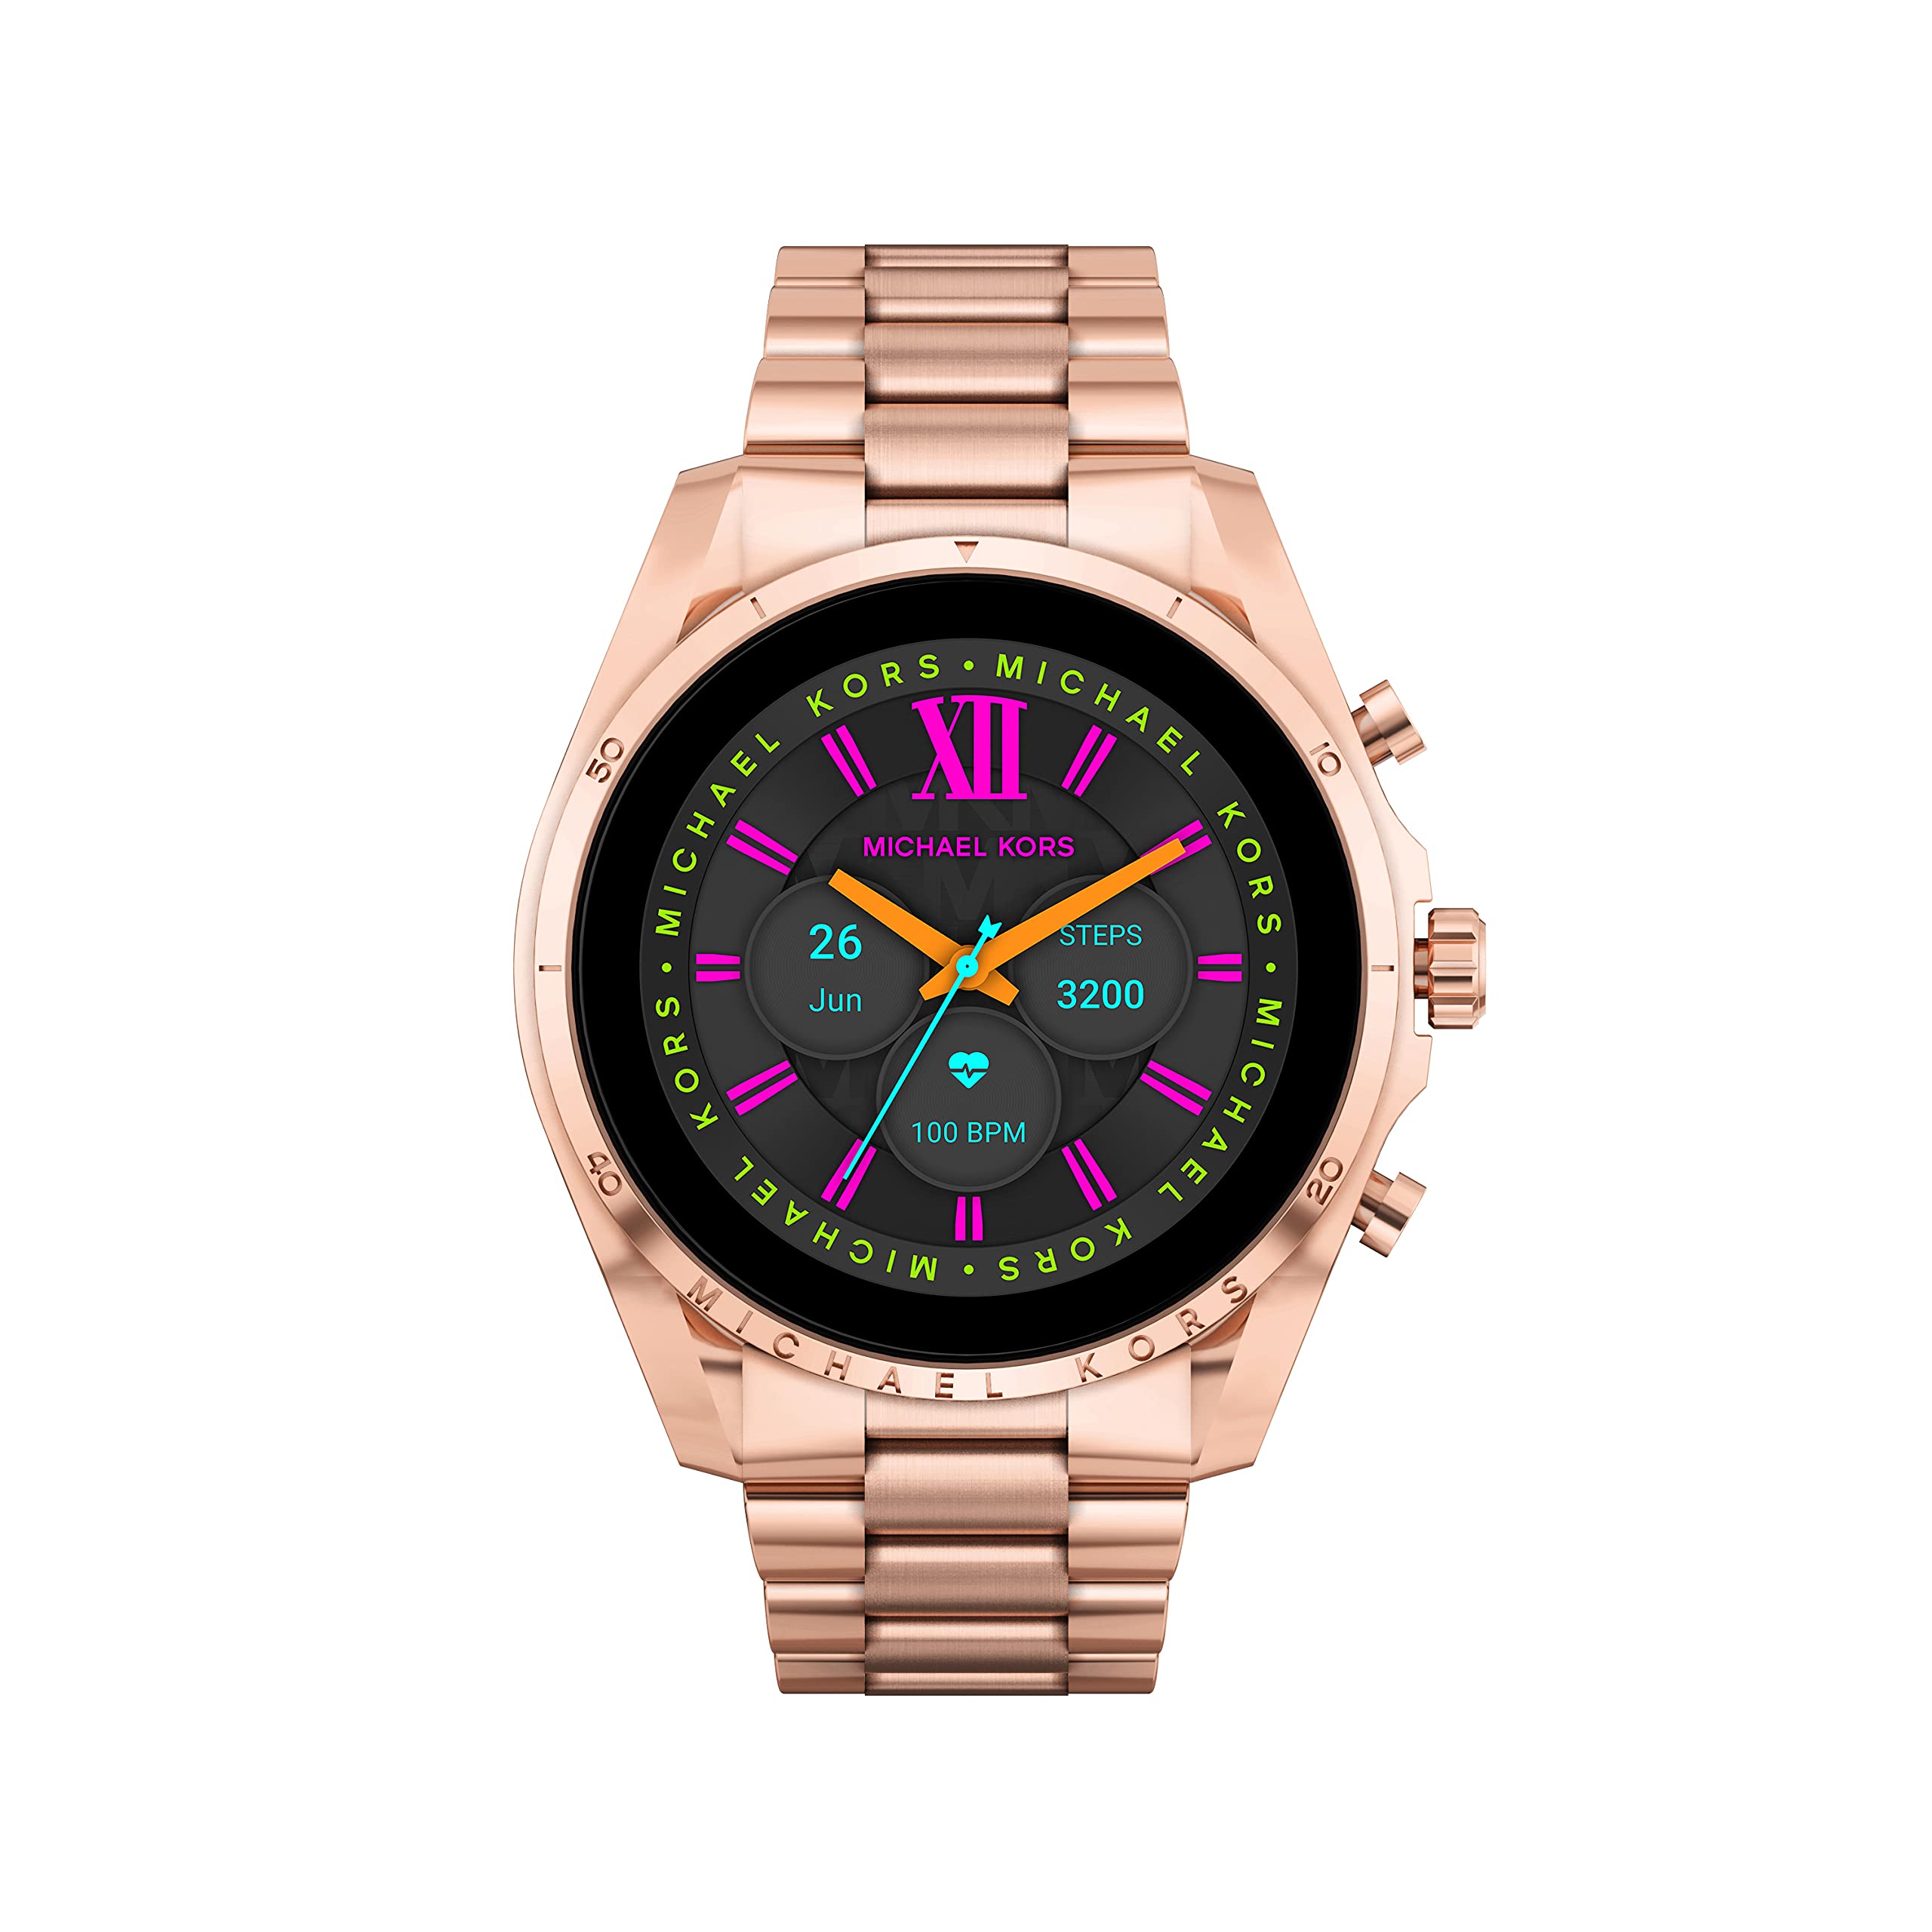 Save 25 on Michael Kors watches in Amazons Black Friday sale  The Sun